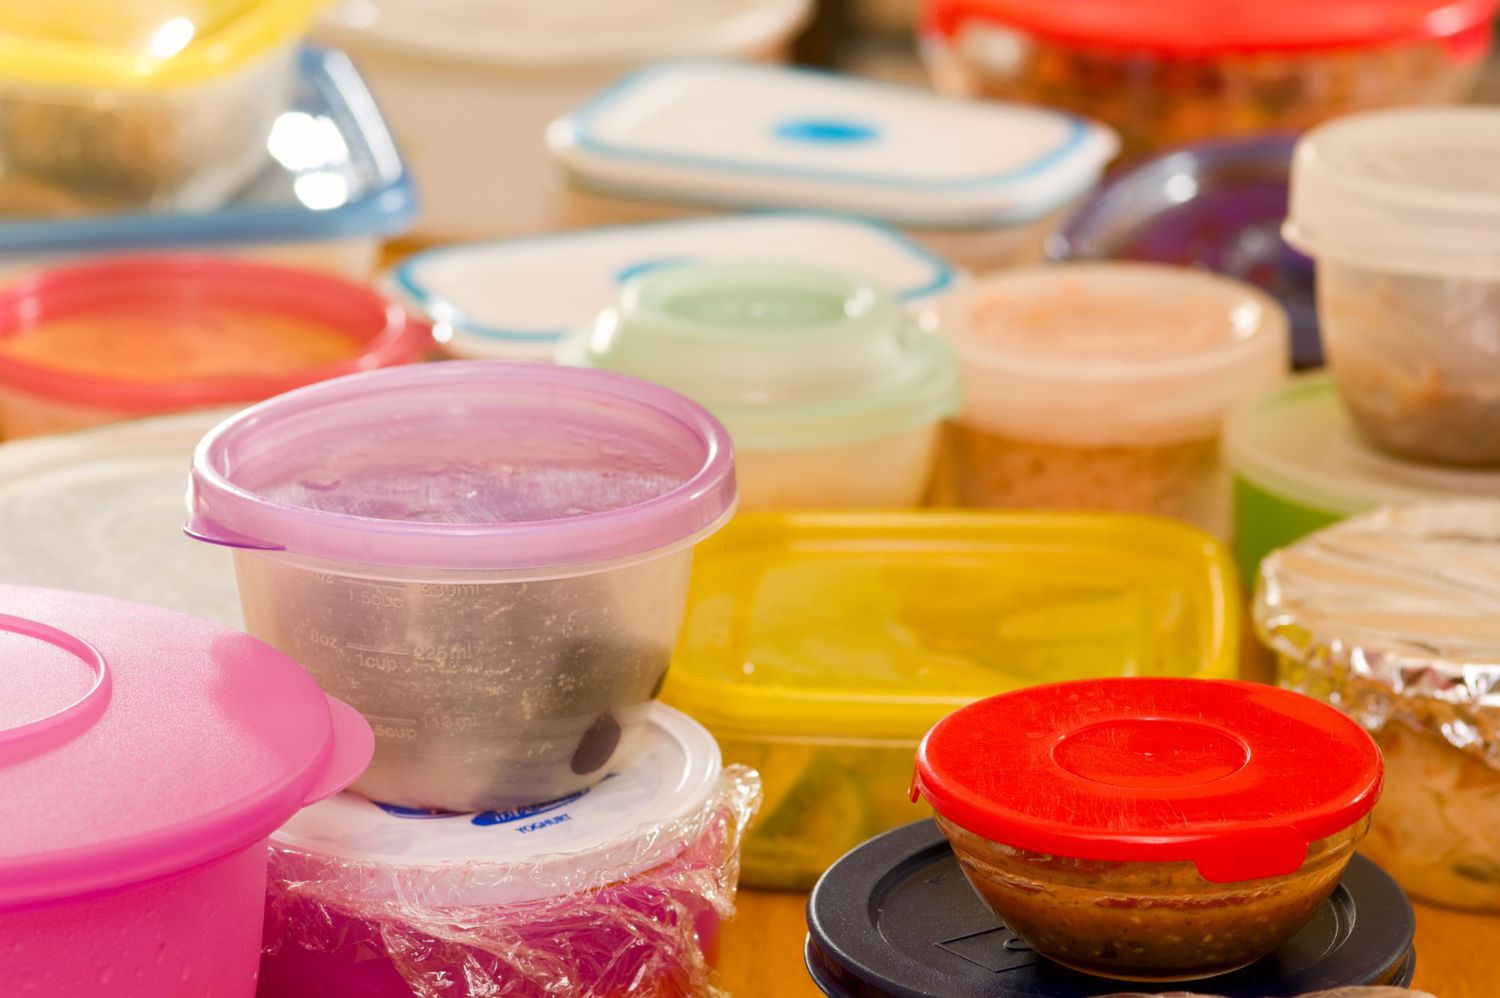 Leftovers in Plastic Food Containers